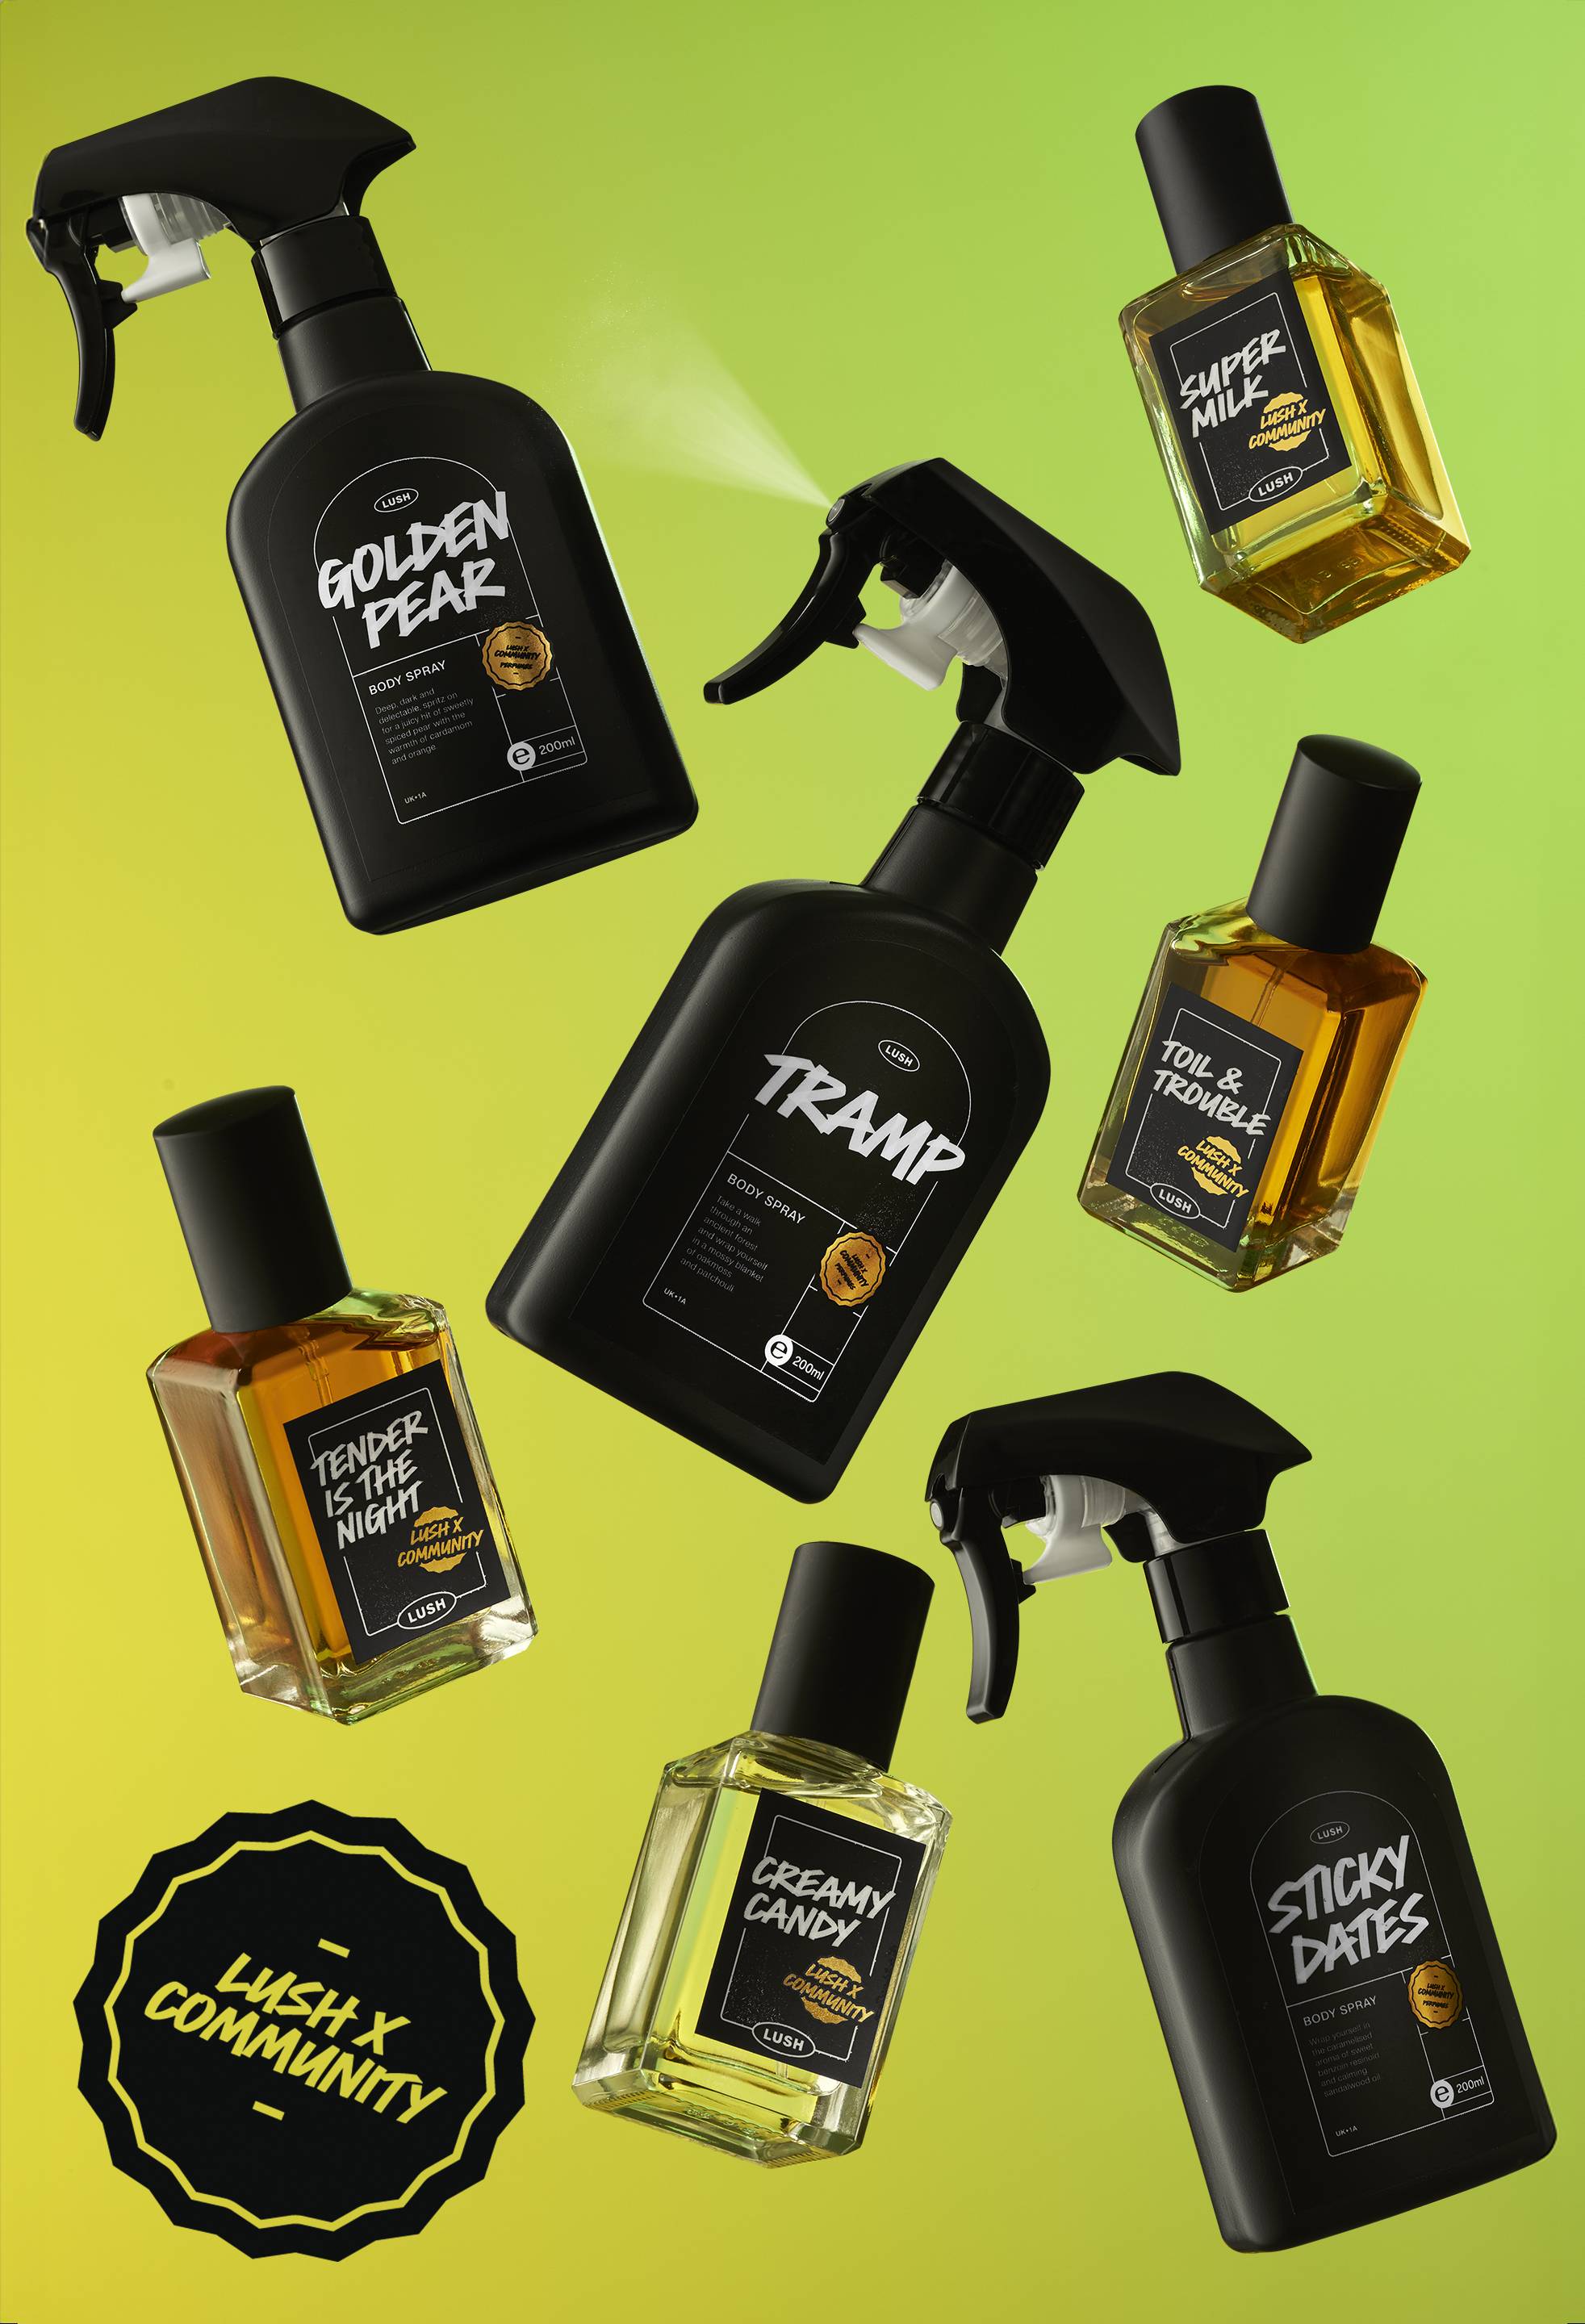 A neon yellow and green gradient background with the 7 Community Fragrance products scattered across.